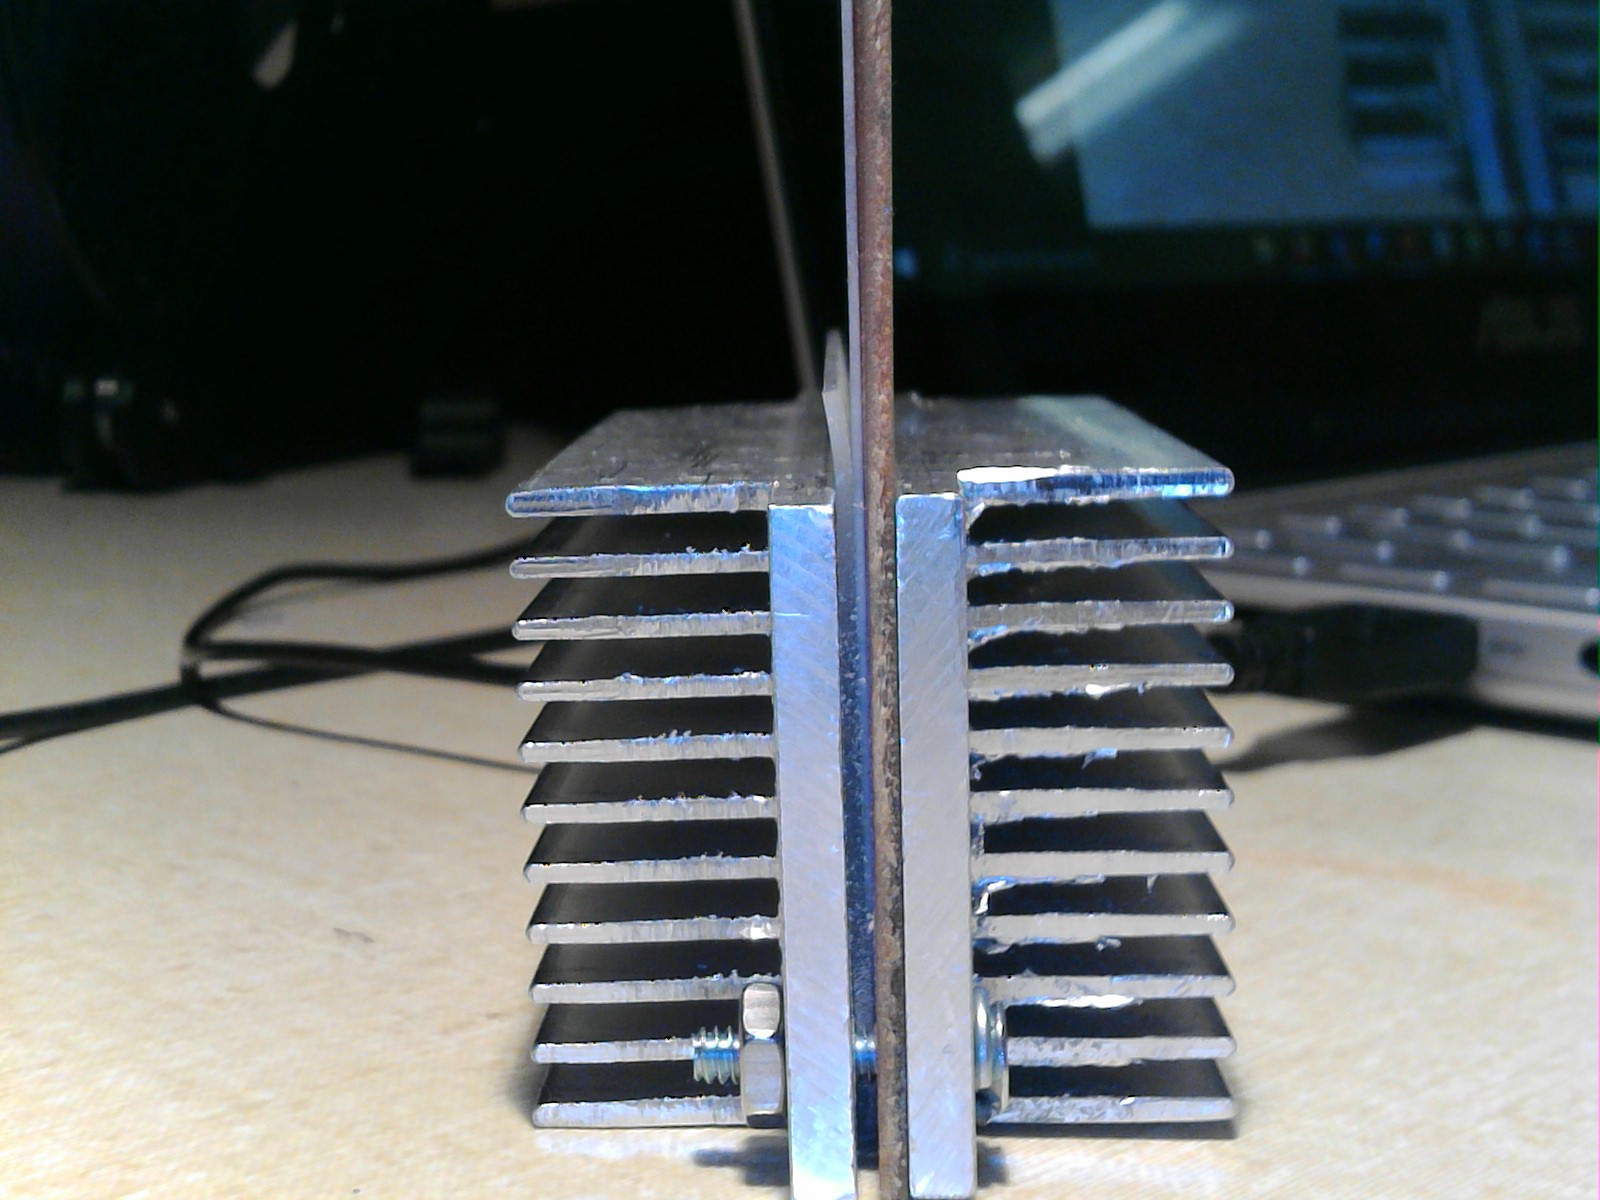 a view of the gen 1 print head assembly from the side. Both aluminum heat sinks are visible as are the various layers of the clamped assembly. the filament is at the bottom of this image, though too small to see.